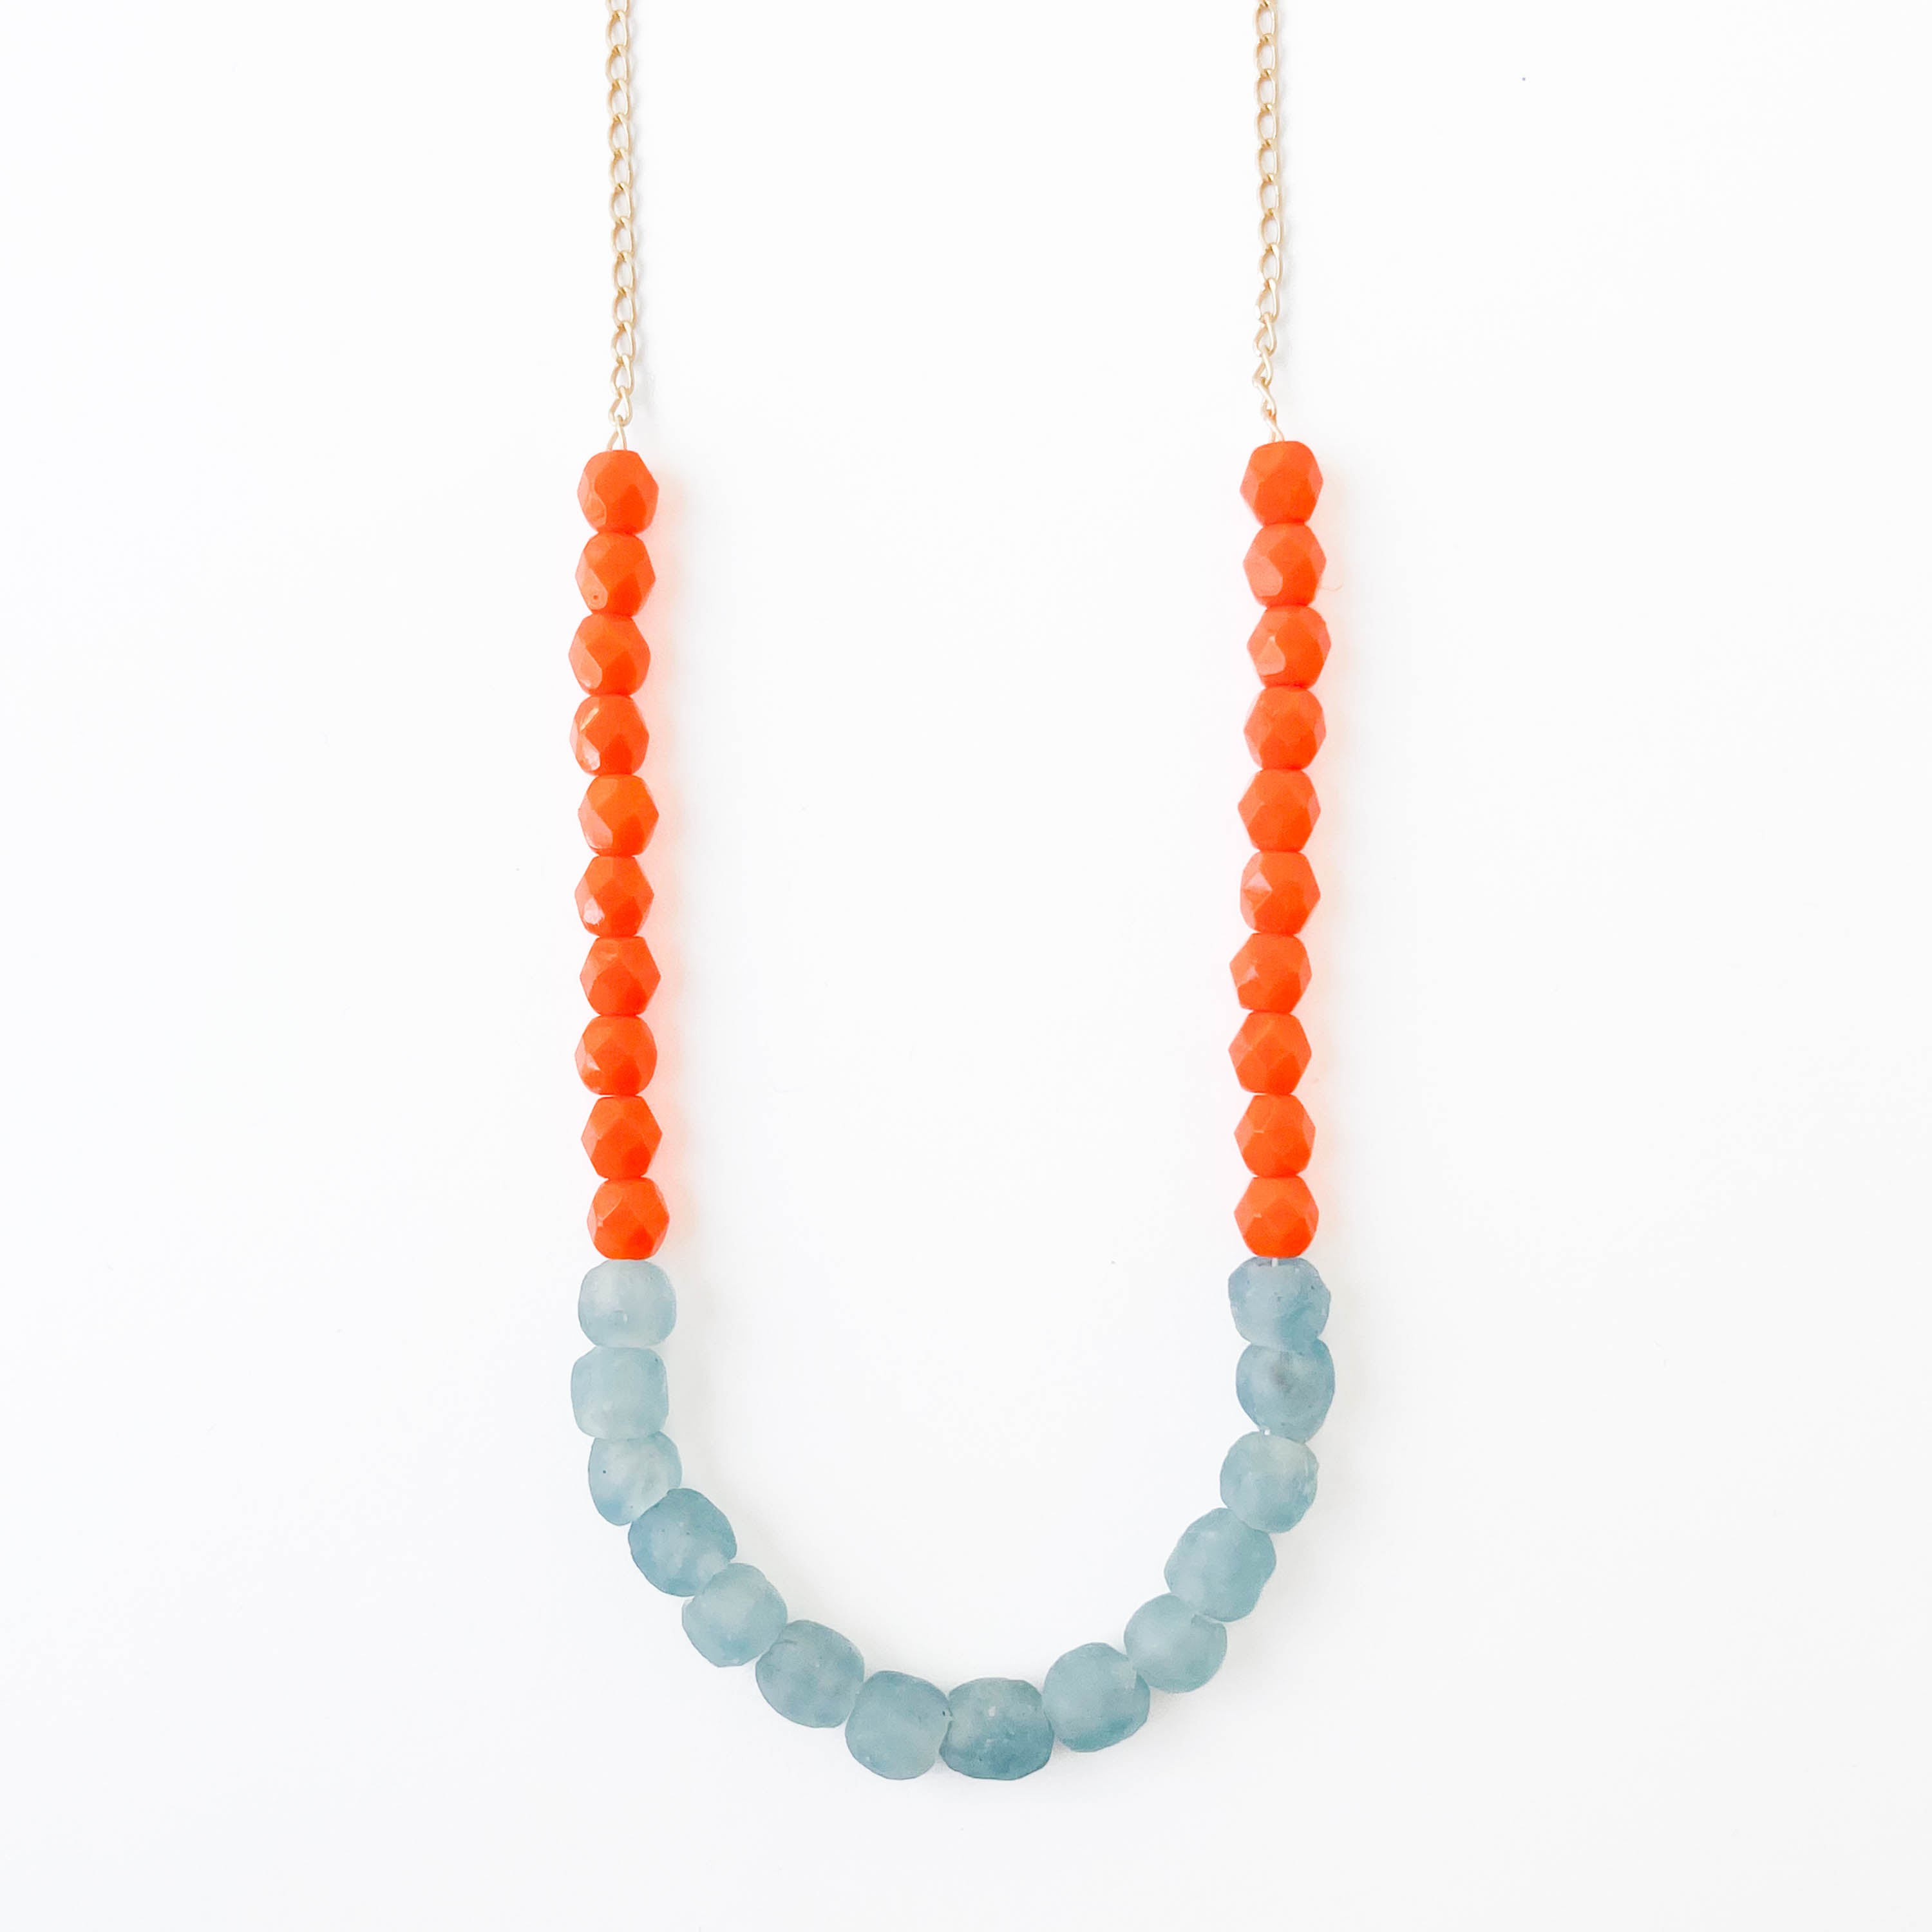 An Orange Recycled Glass Bead Necklace – LFrank